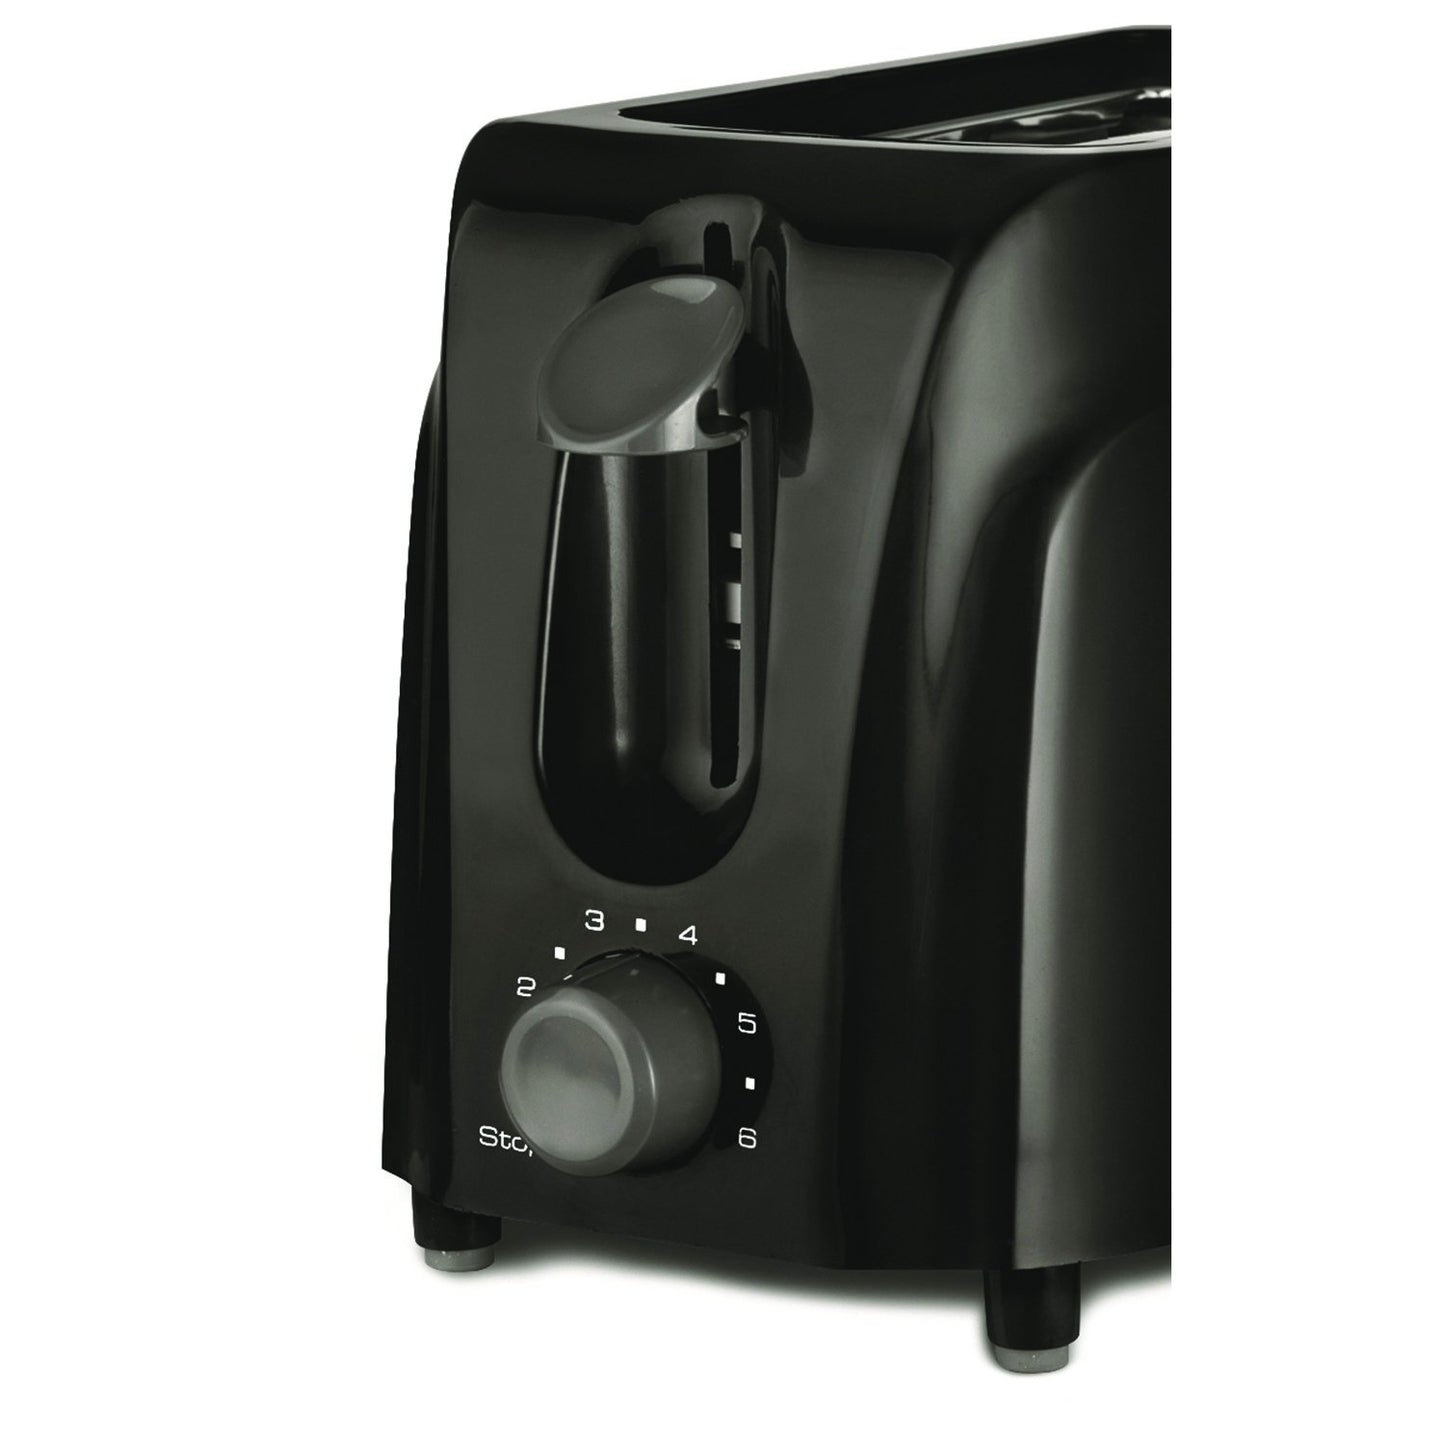 BRENTWOOD TS-260B Two Slice Toaster Black